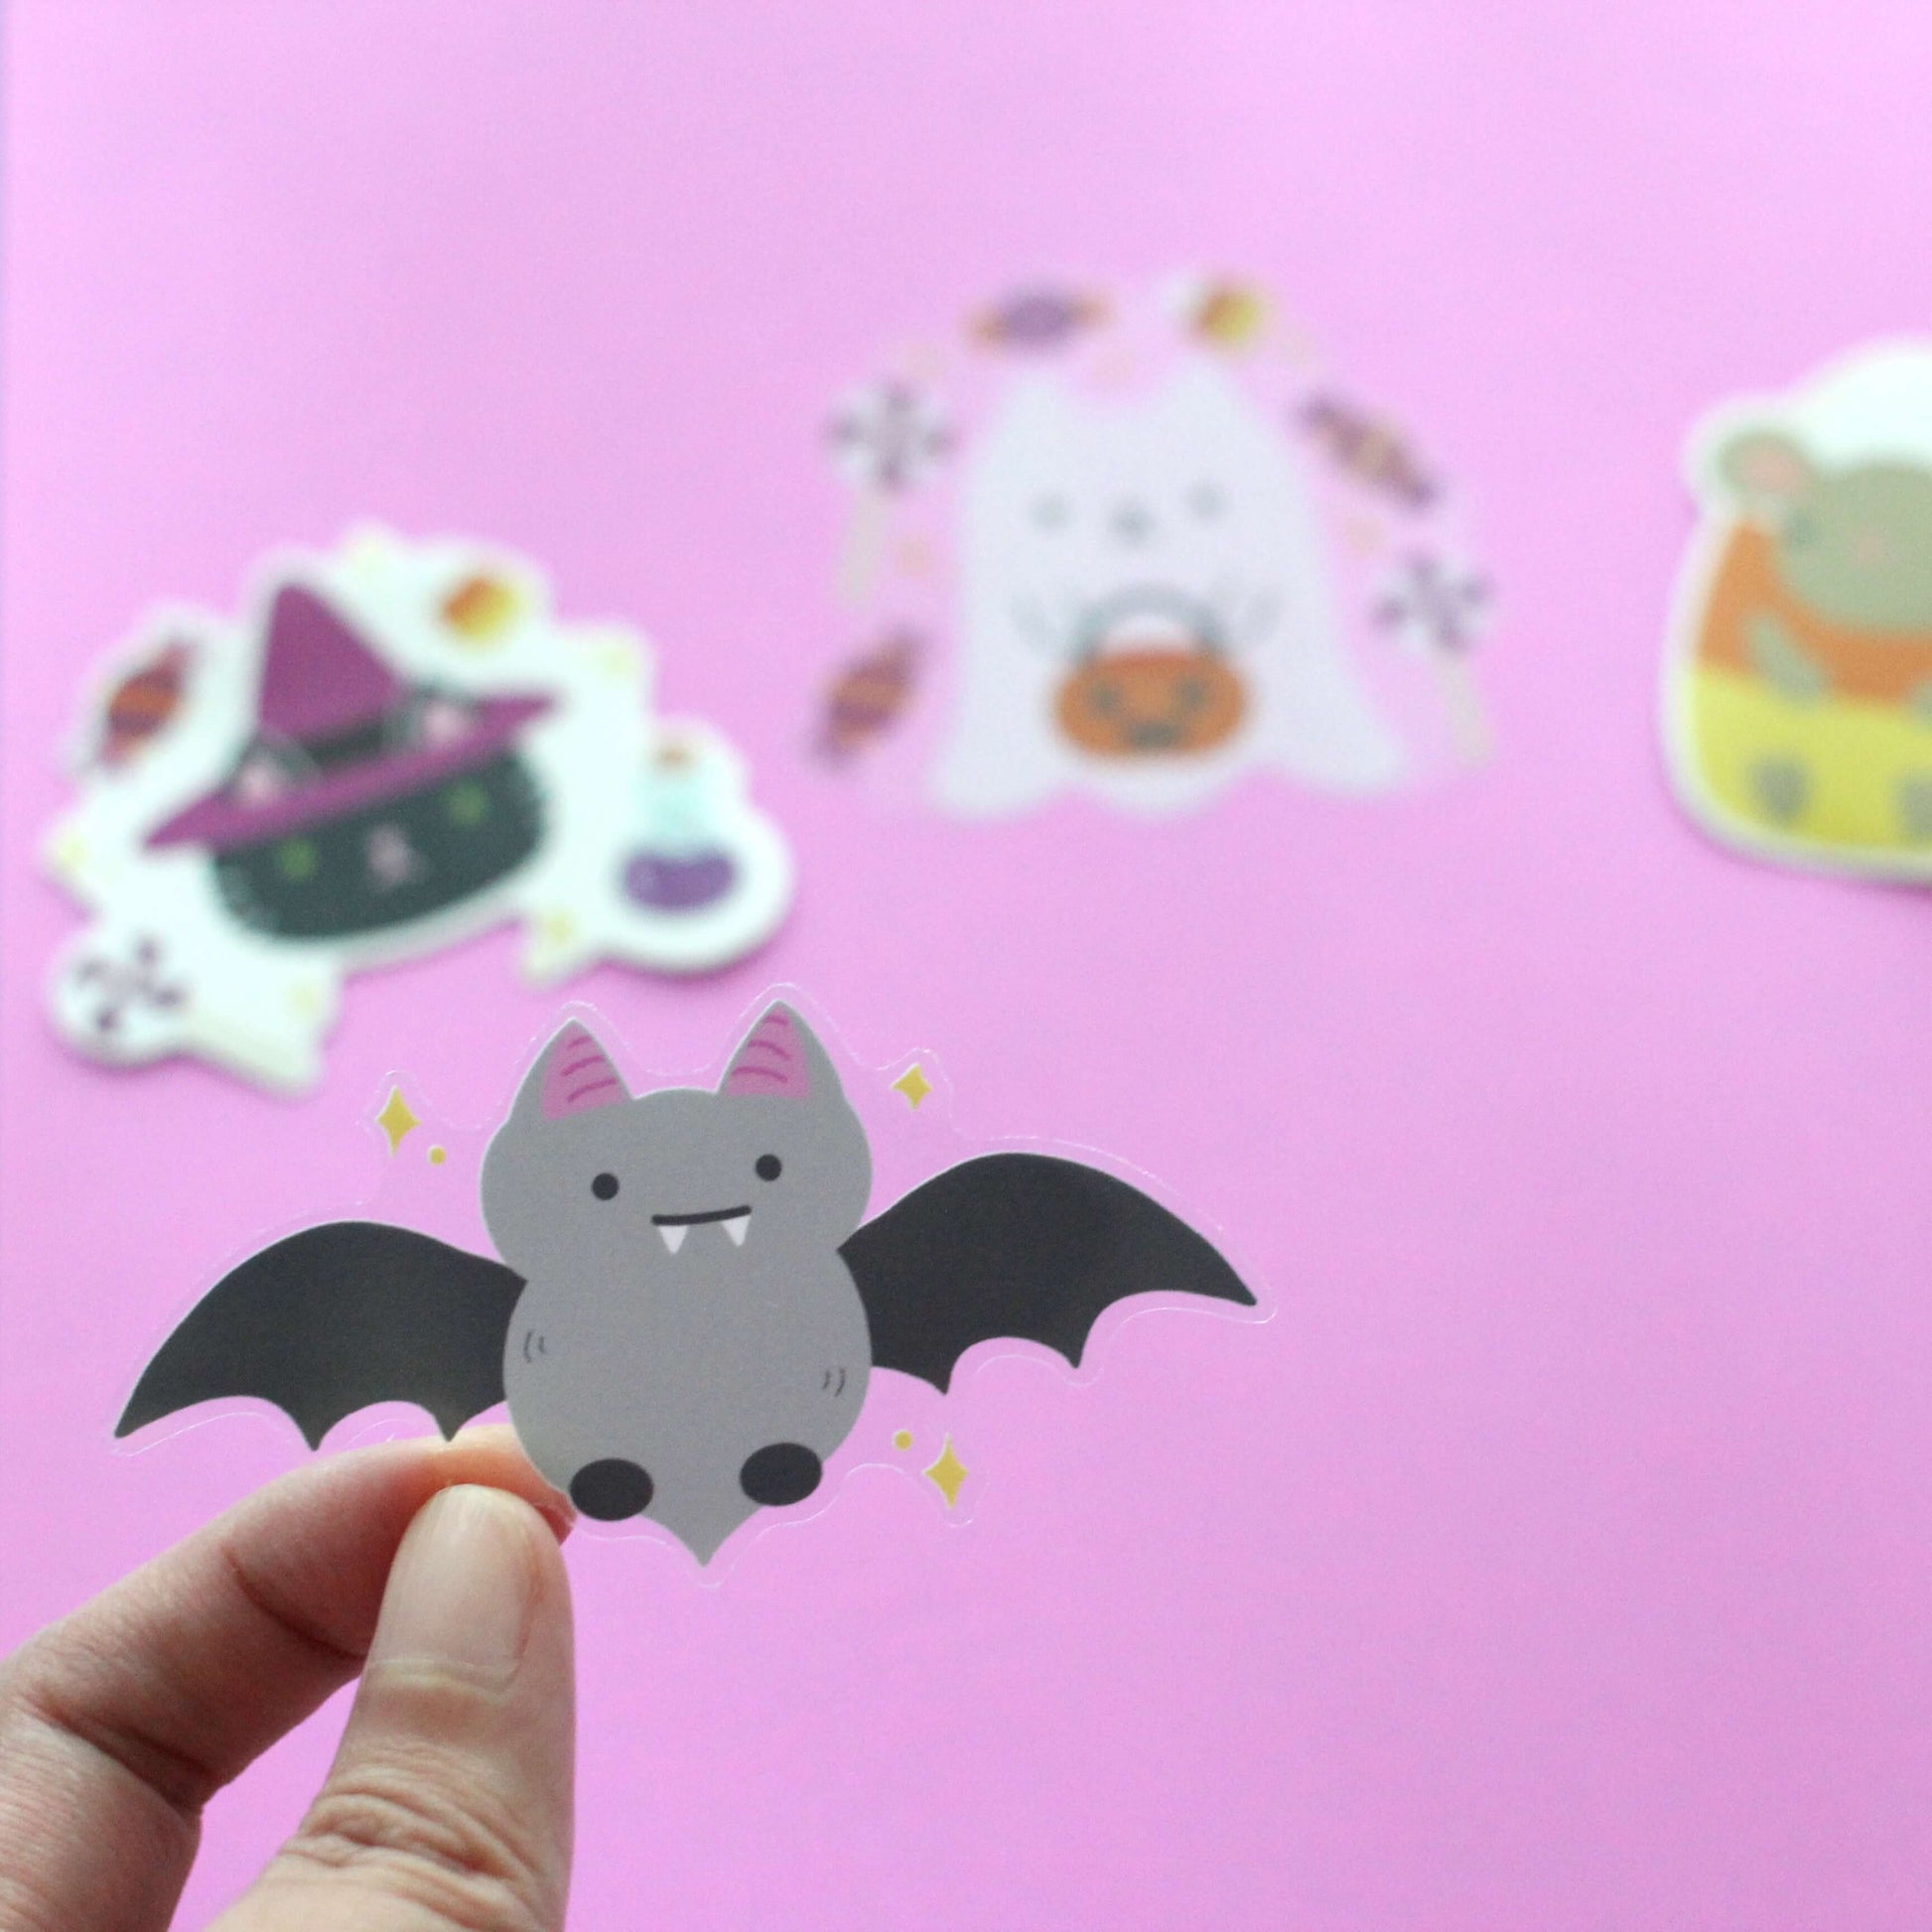 Halloween Clear Vinyl Sticker Set - Witch Cat, Cute Bat, Ghost Cat, Candy Corn Mouse Stickers